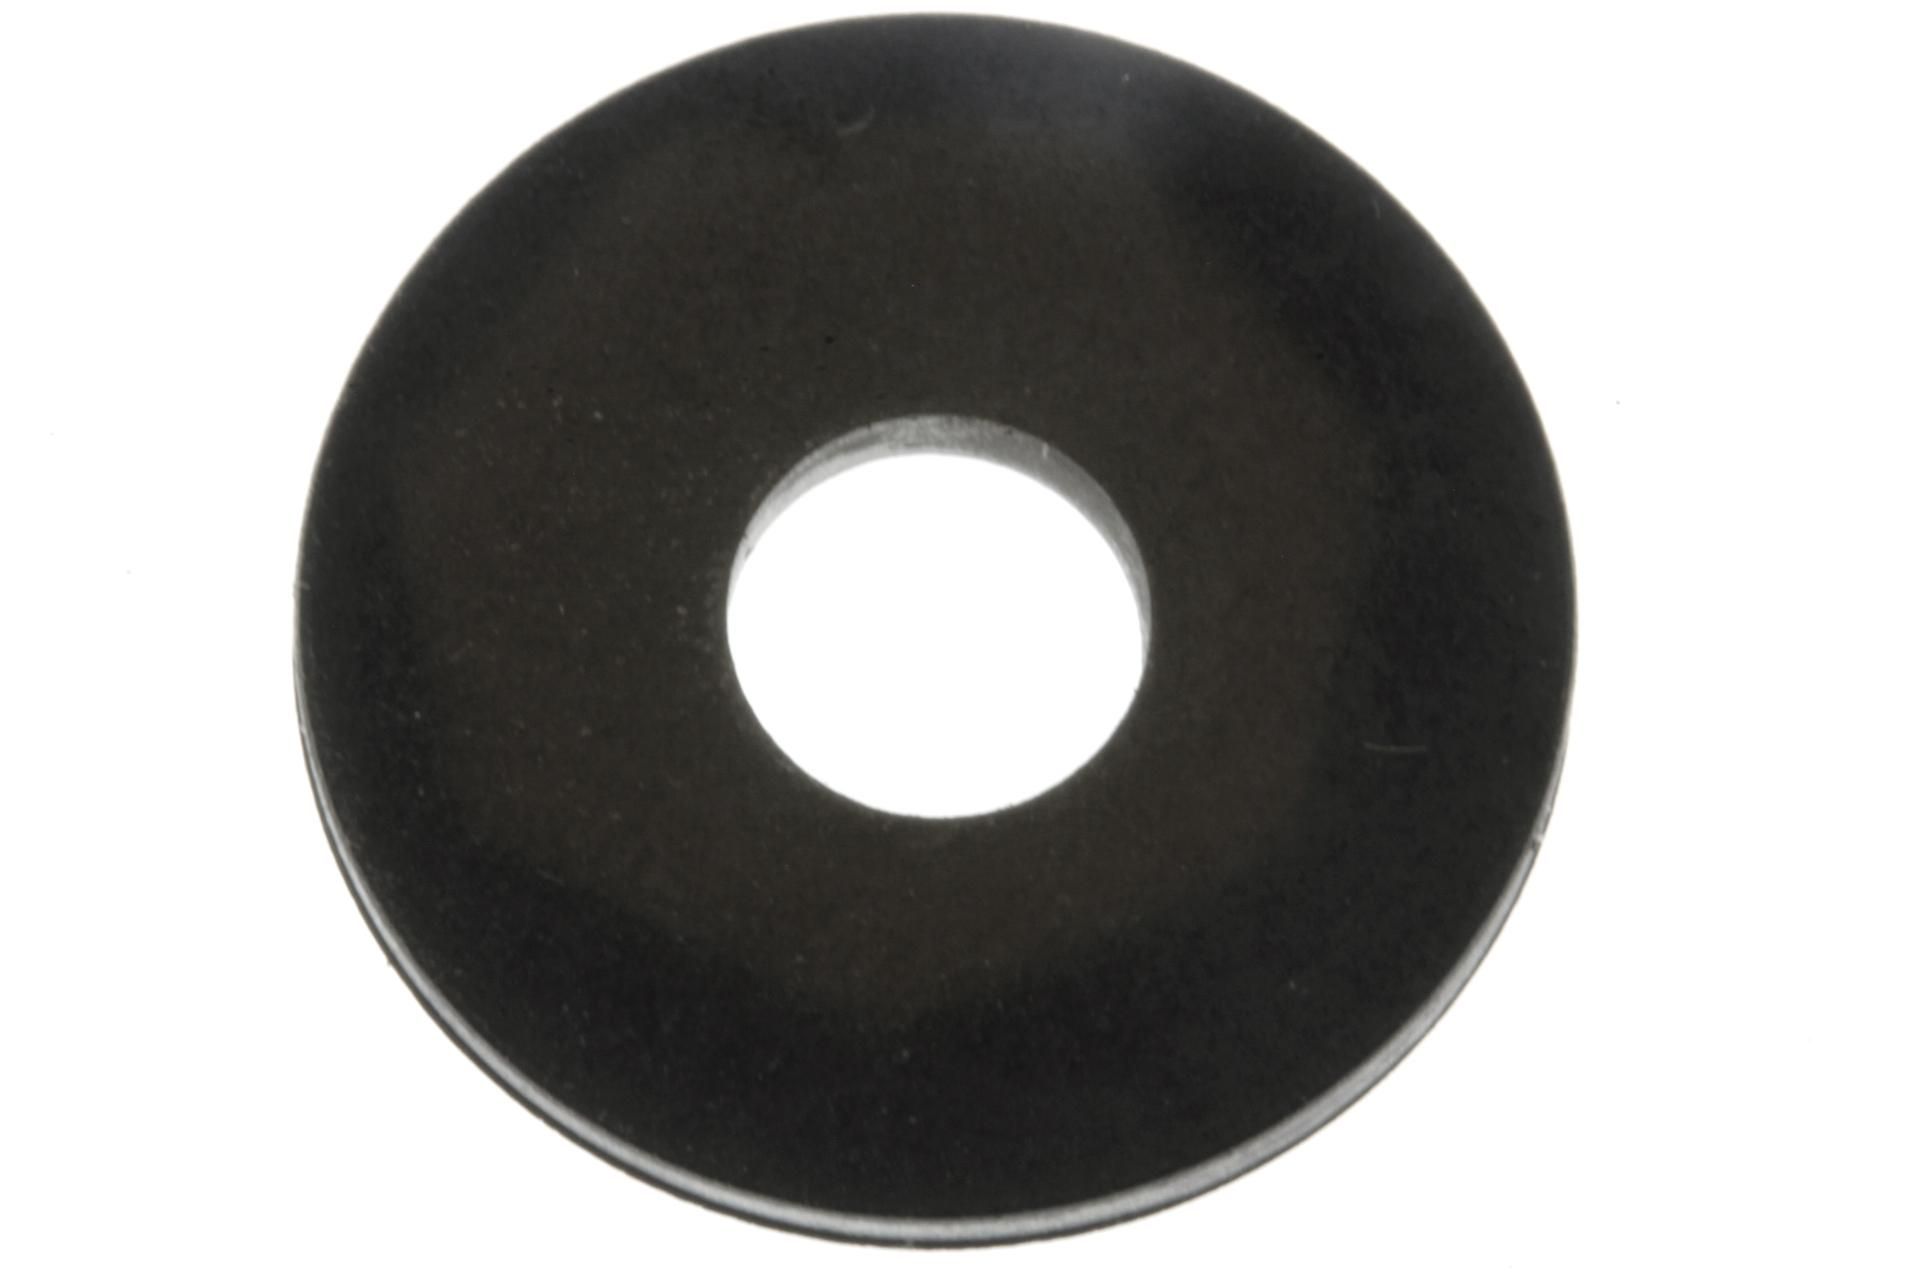 141-23427-00-00 Superseded by 90202-06008-00 - WASHER,PLATE